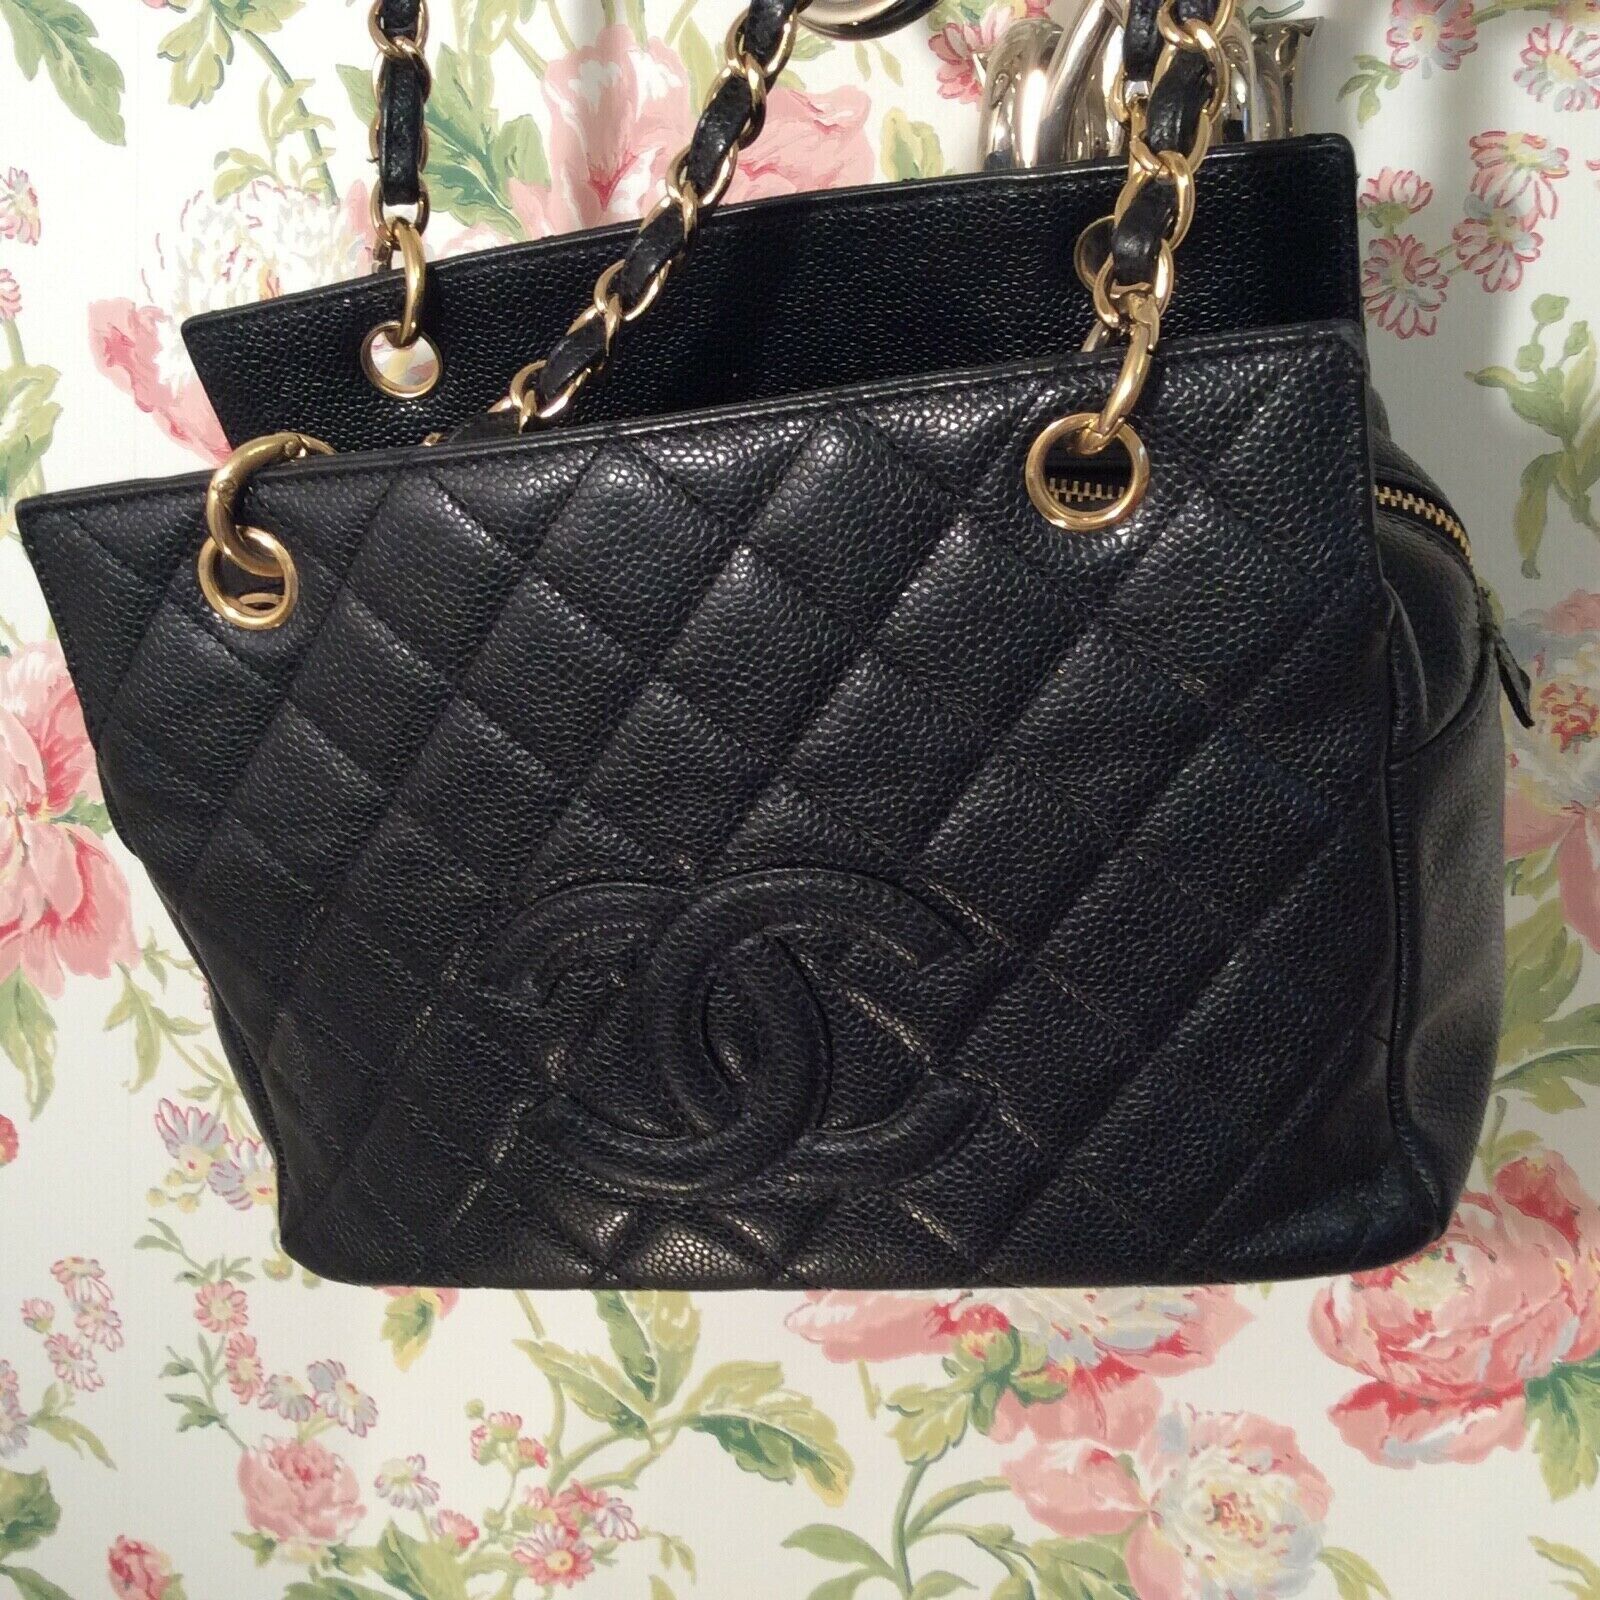 Chanel Medium Deauville Black caviar leather studded tote bag